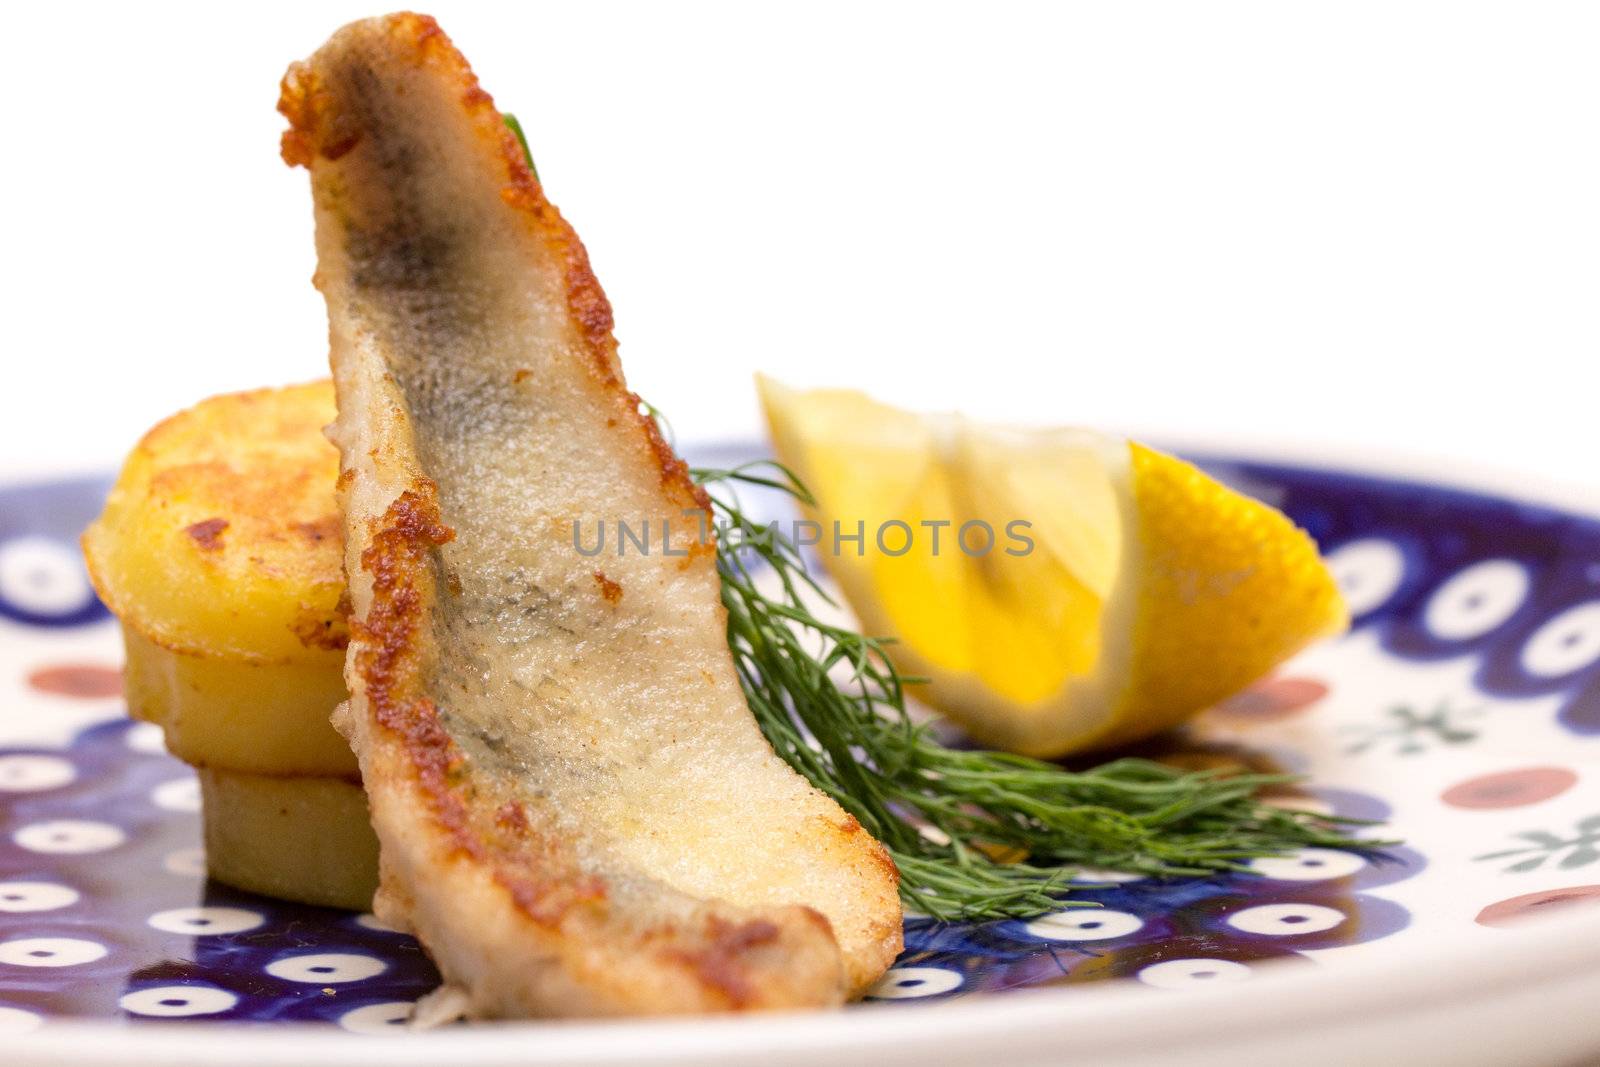 Perch filet with fried potatoes, lemon and dill